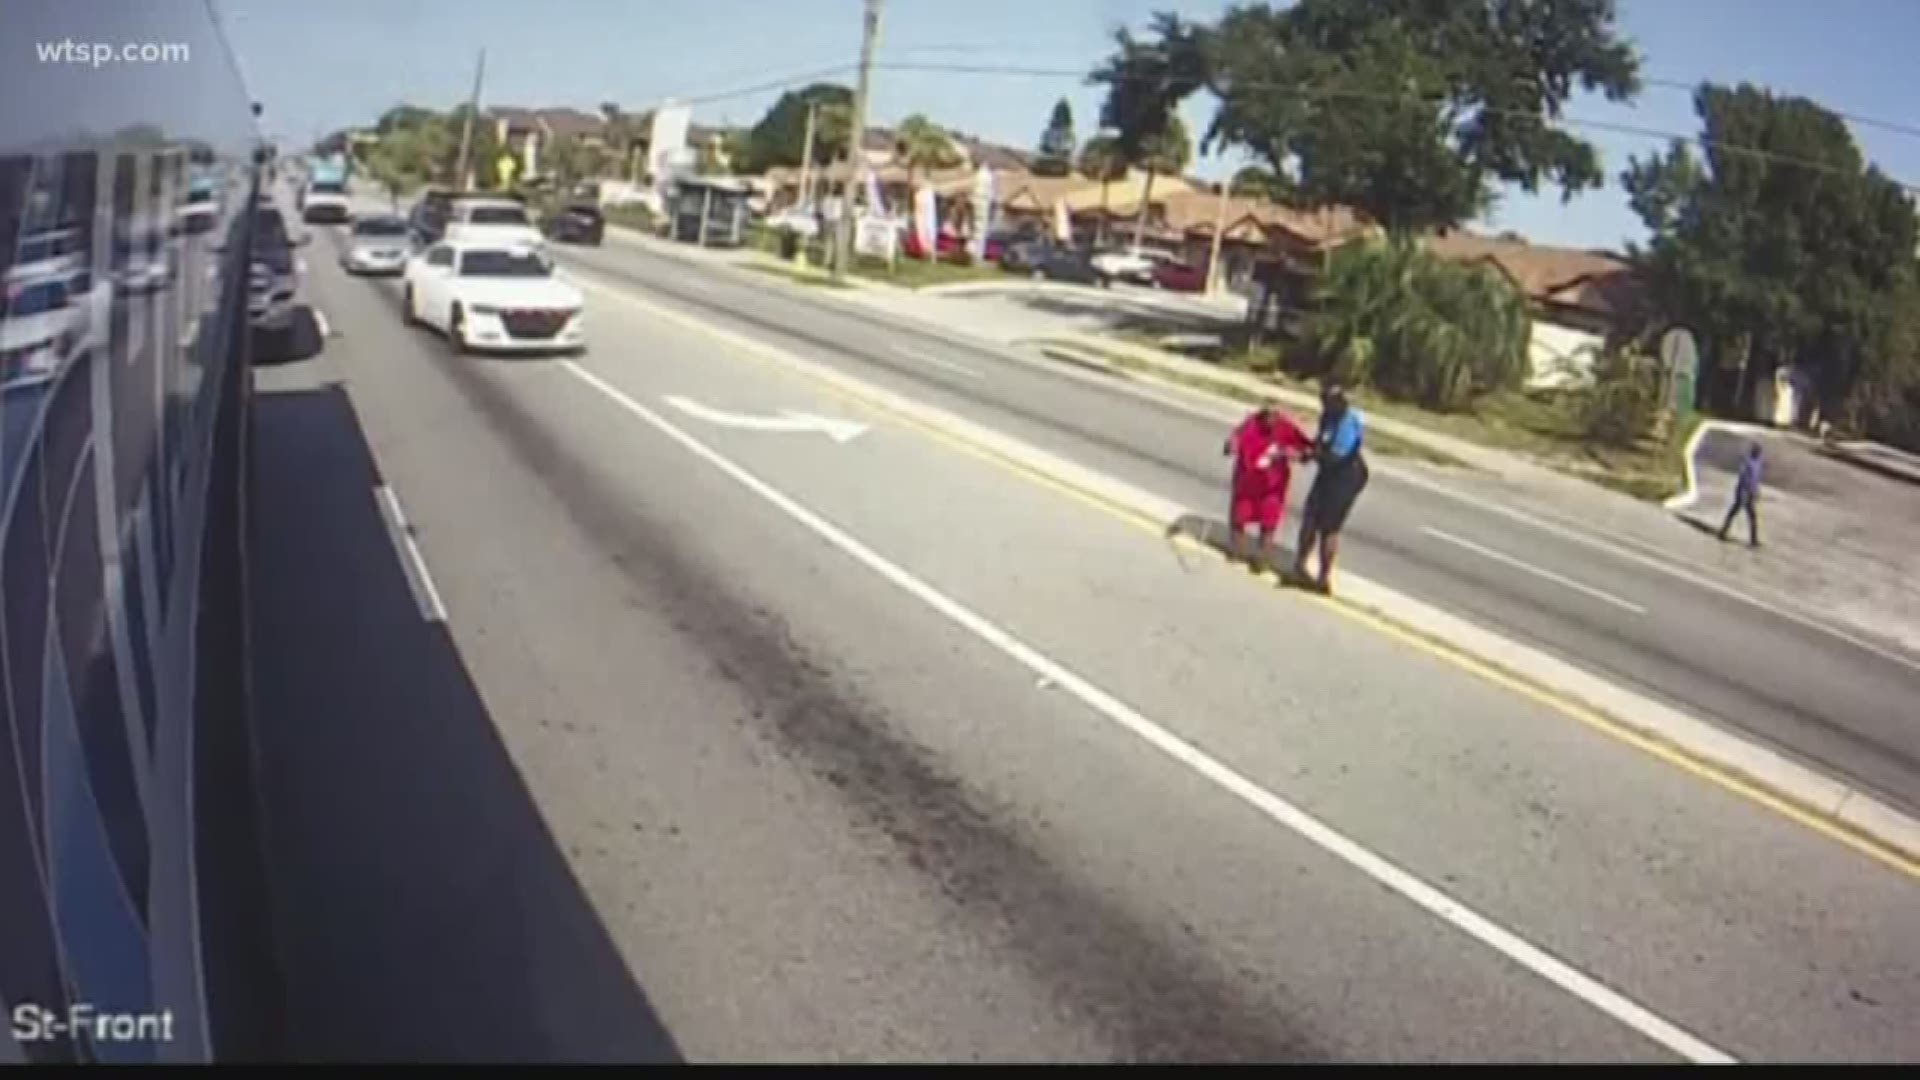 A HART bus driver didn’t hesitate to help a woman with a cane trying to cross the street on one of her routes.